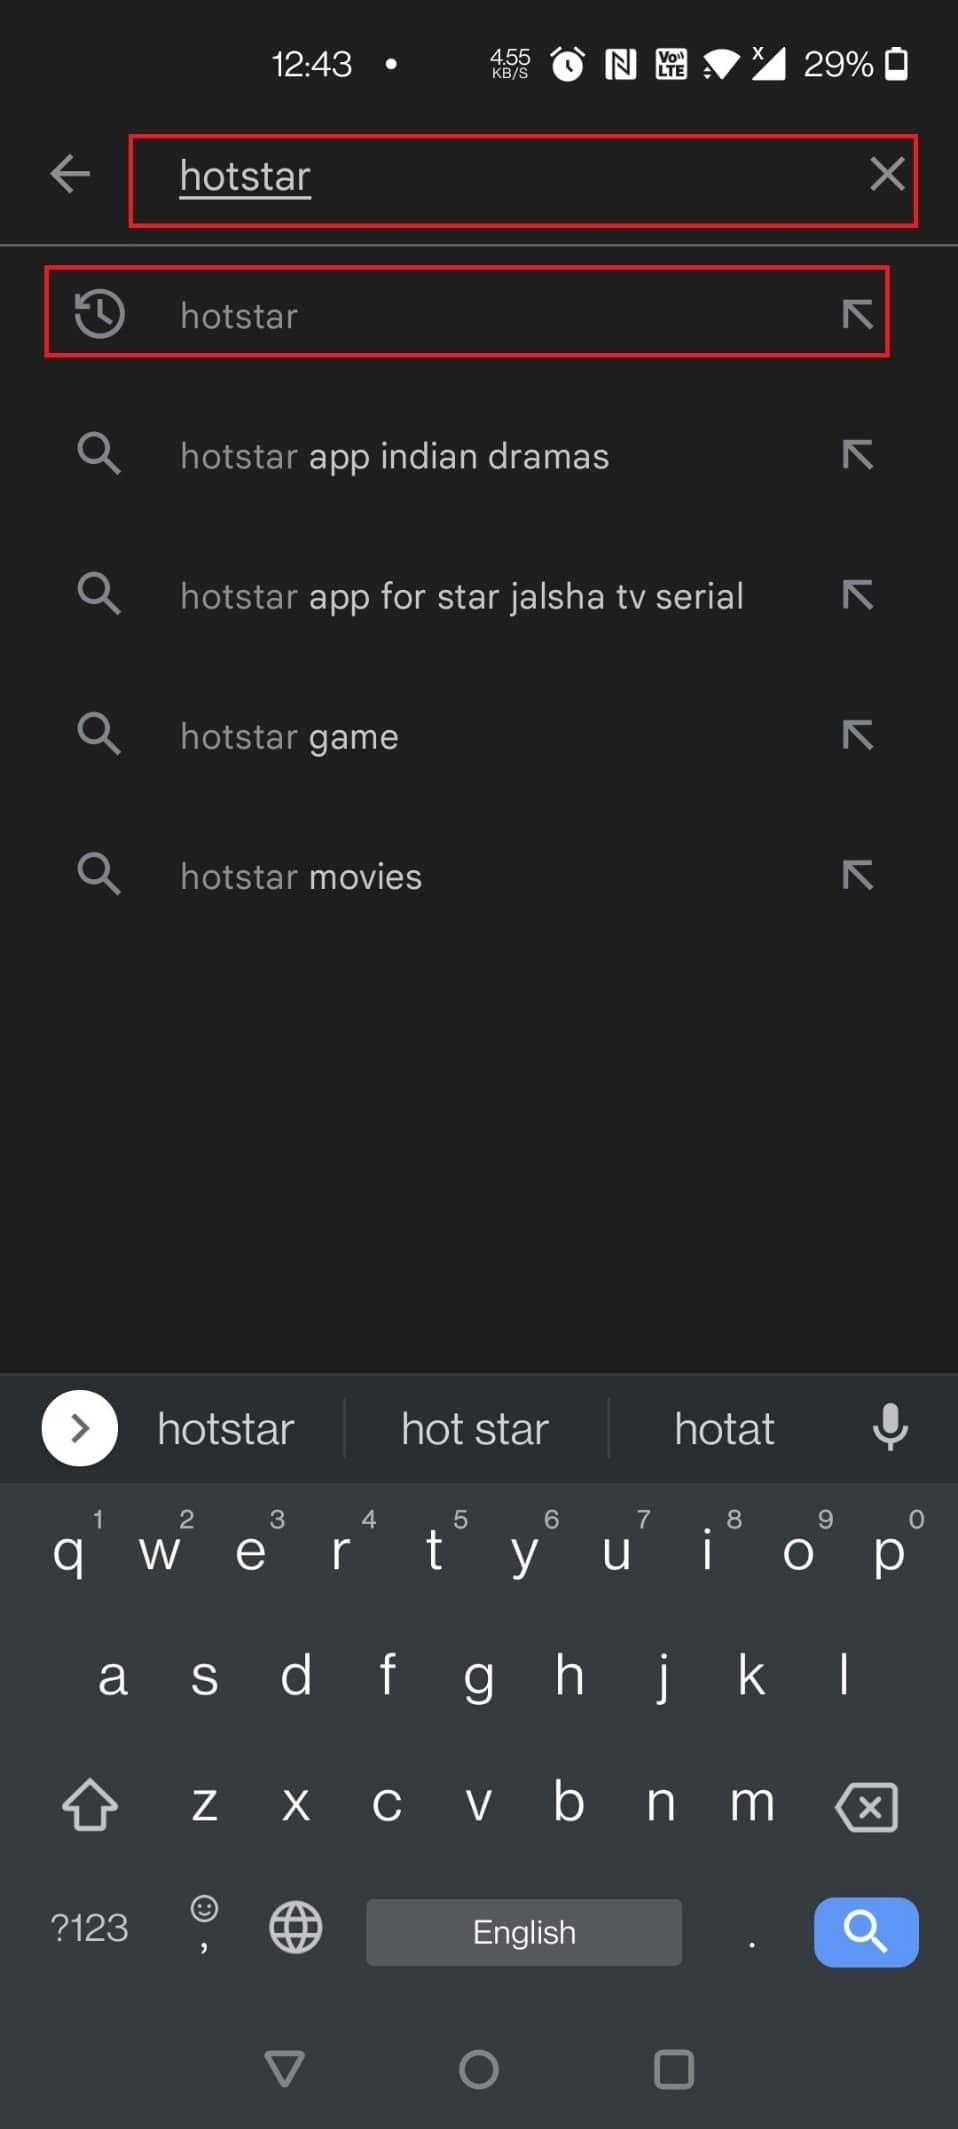 Type Hotstar in the search bar and tap on the search result